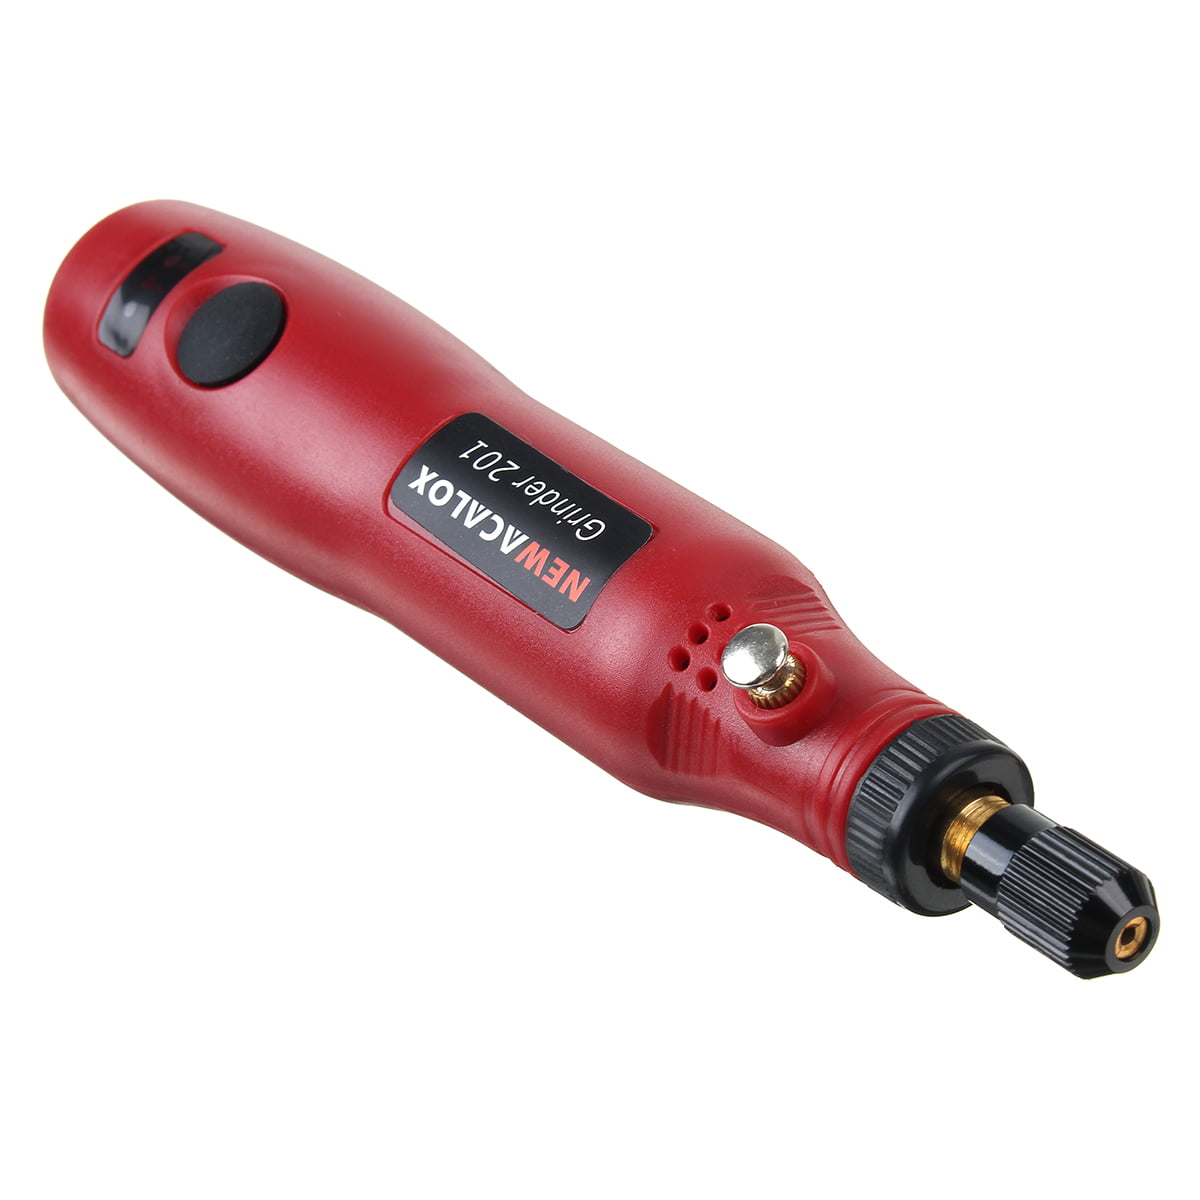 15000 RPM Mini Drill Hand Portable USB Handheld Electric Drill For Grinding Tool